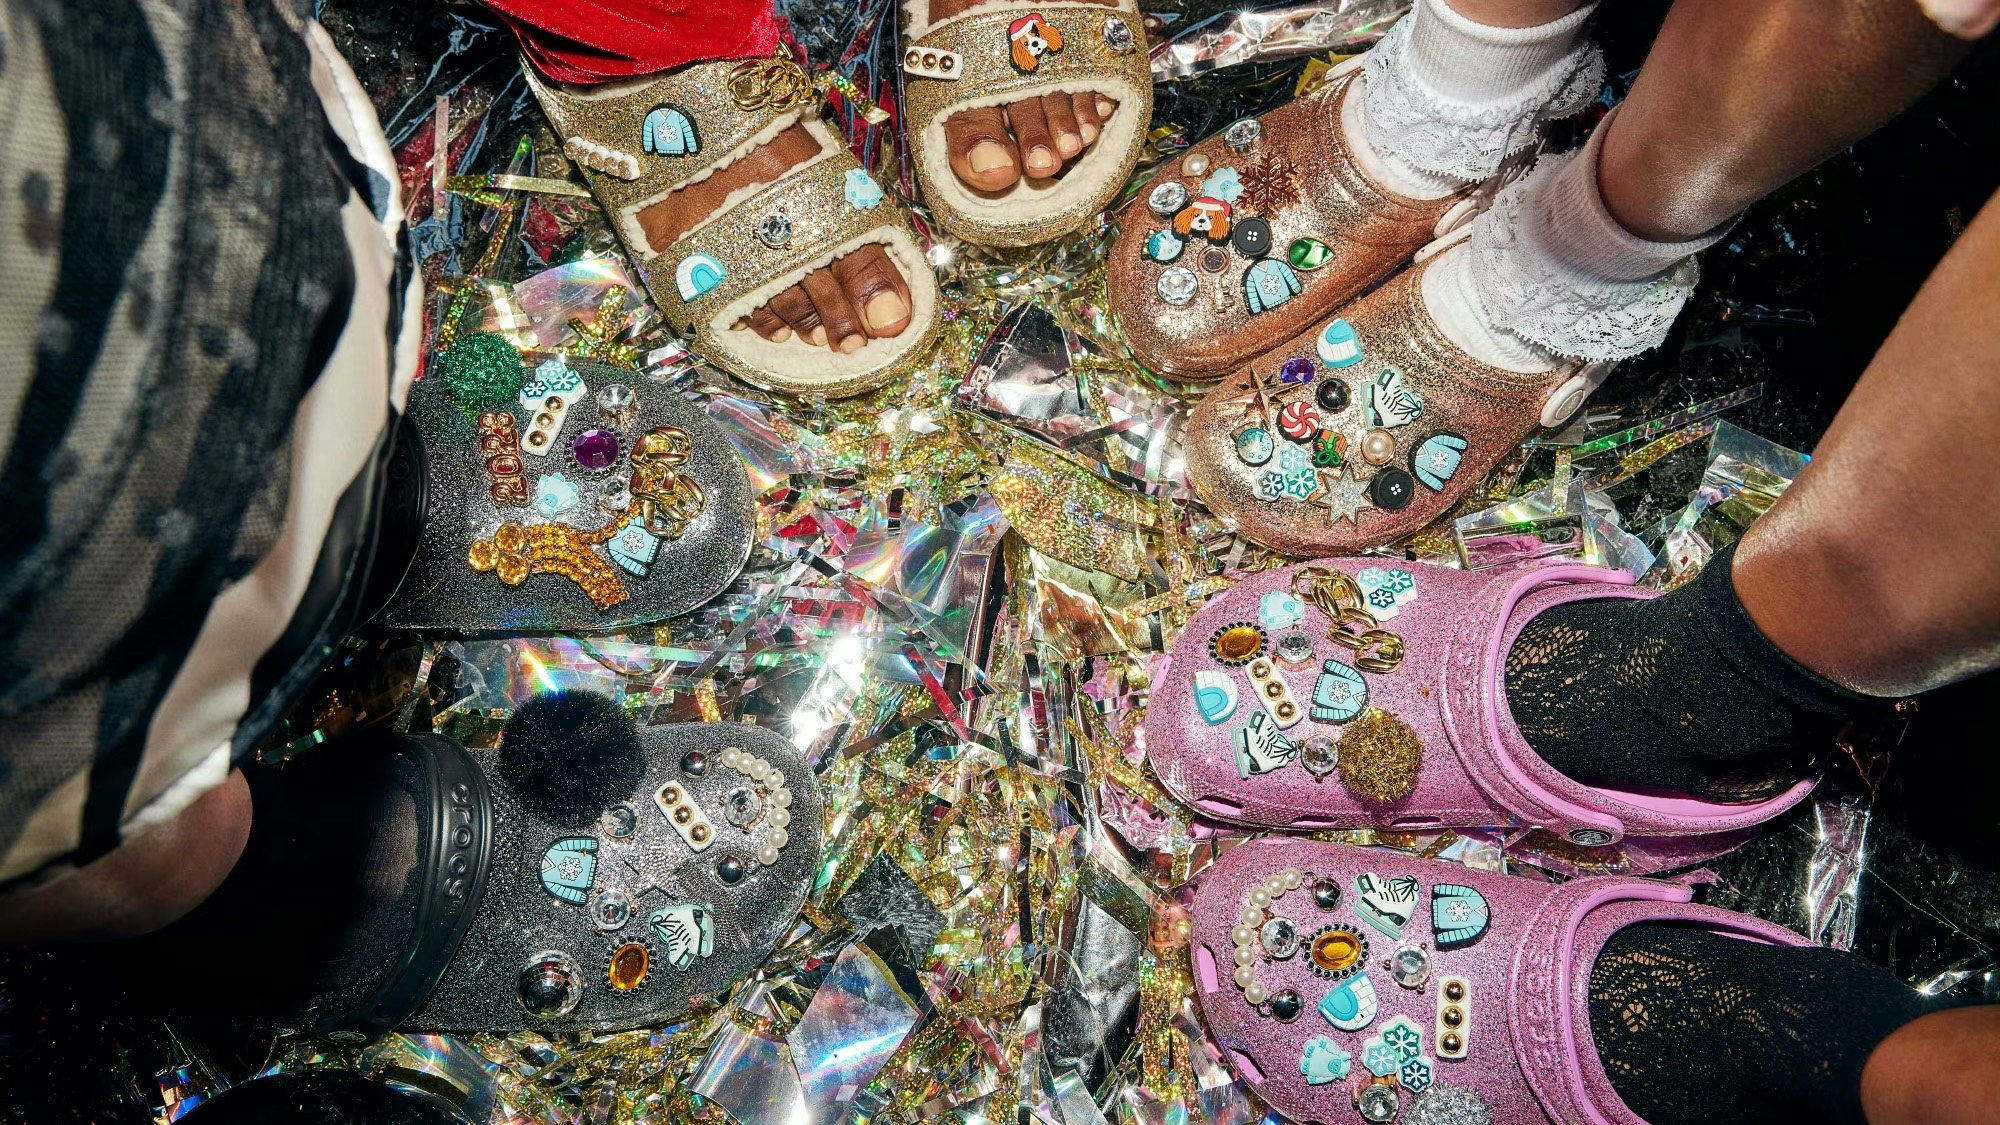 TikTok fashion trends have spilled over into China, and local fashionistas are having a field day with different styles. Which brands are benefiting the most? Photo: Crocs